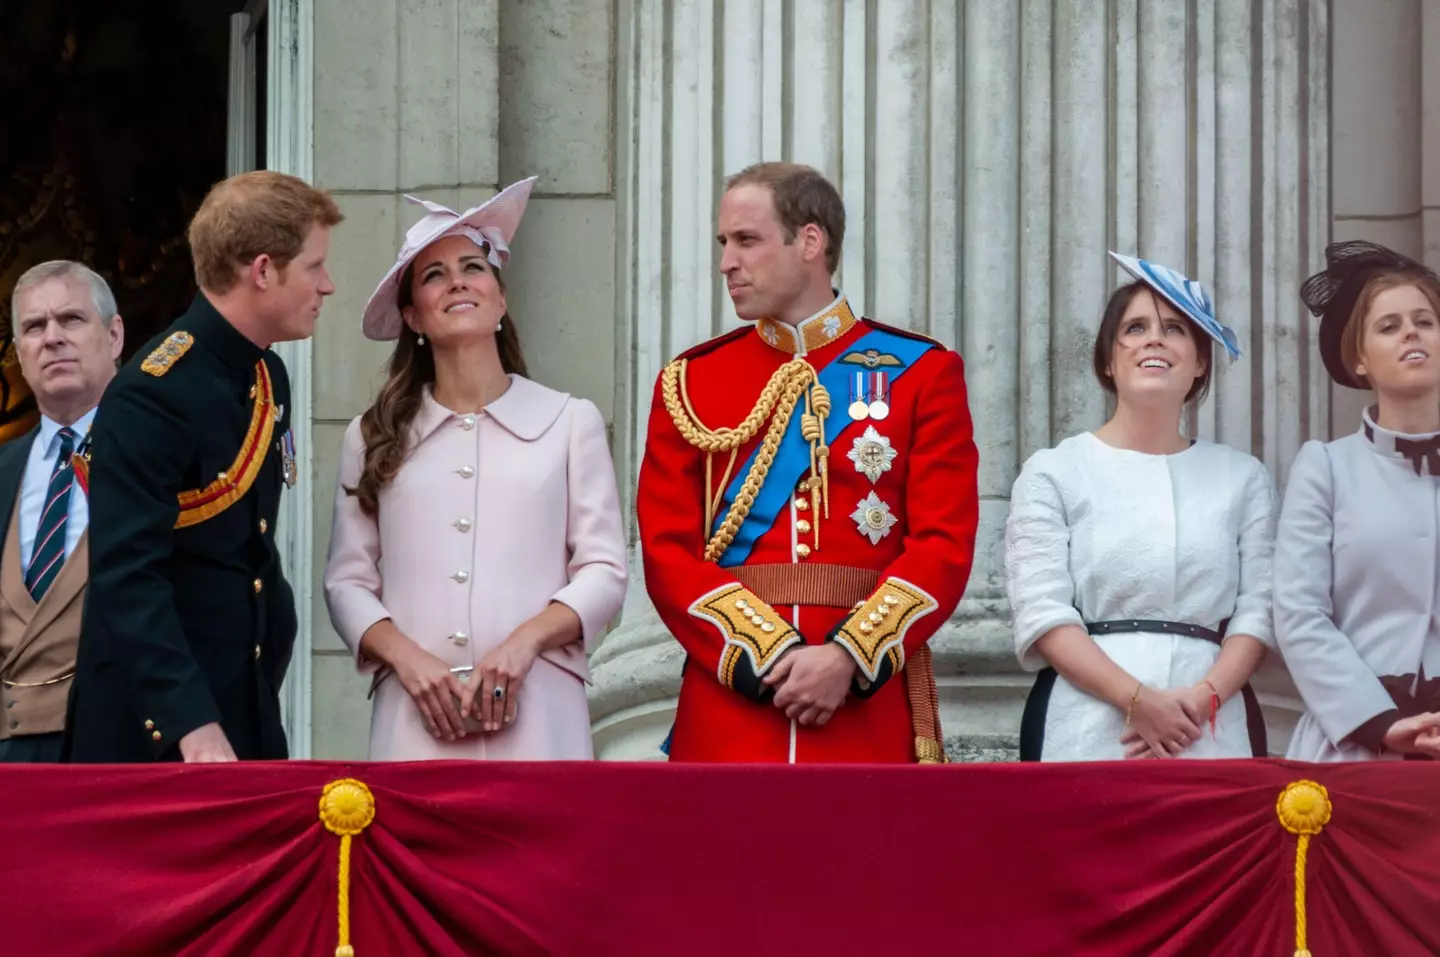 Harry claims Kate and Will urged him to wear the outfit.